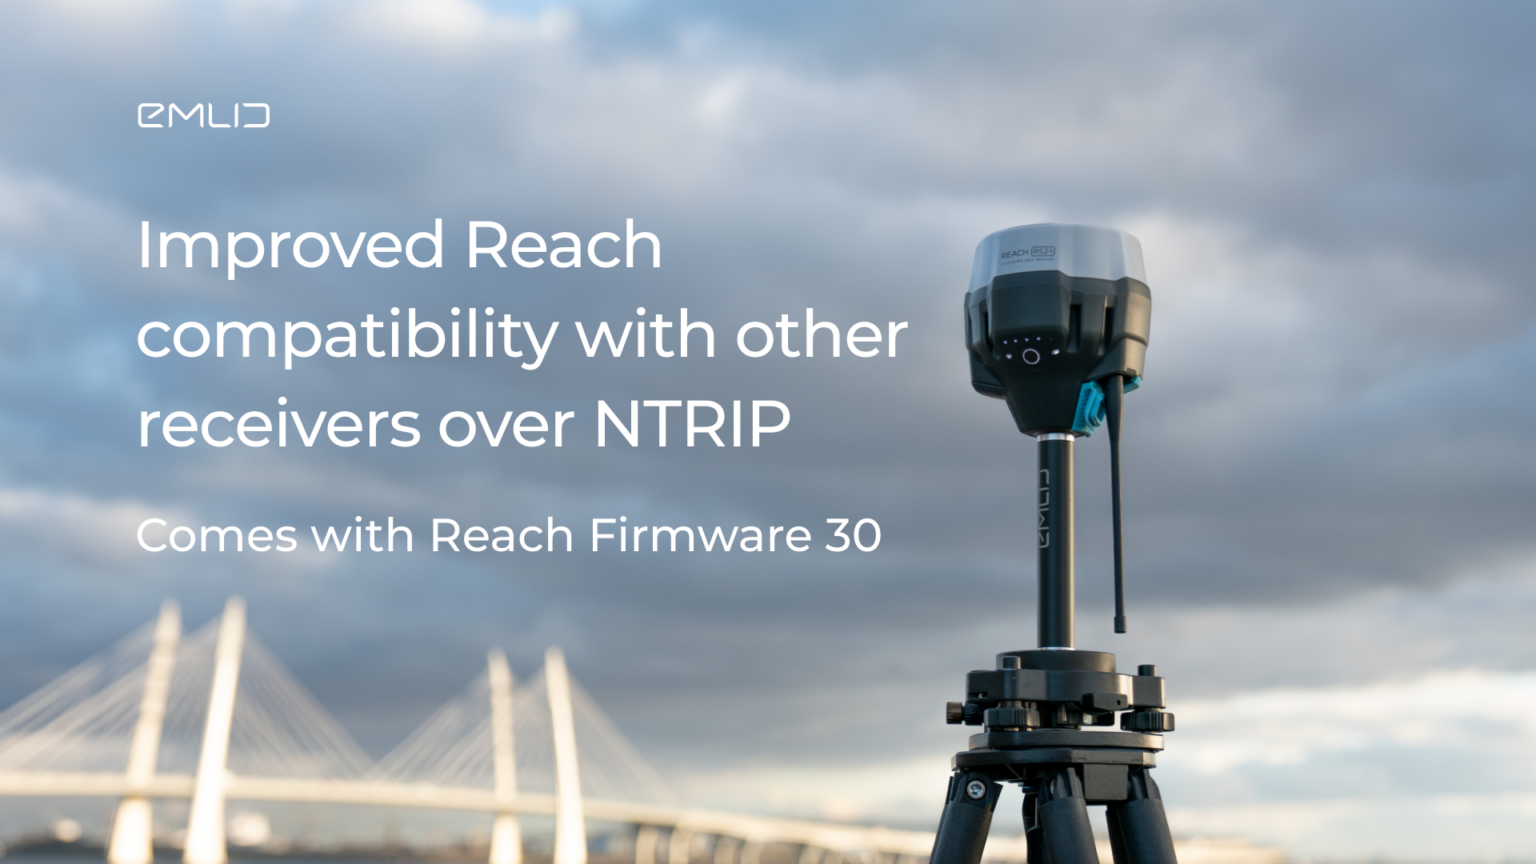 New Reach Firmware 30 improves Reach compatibility with other receivers and software